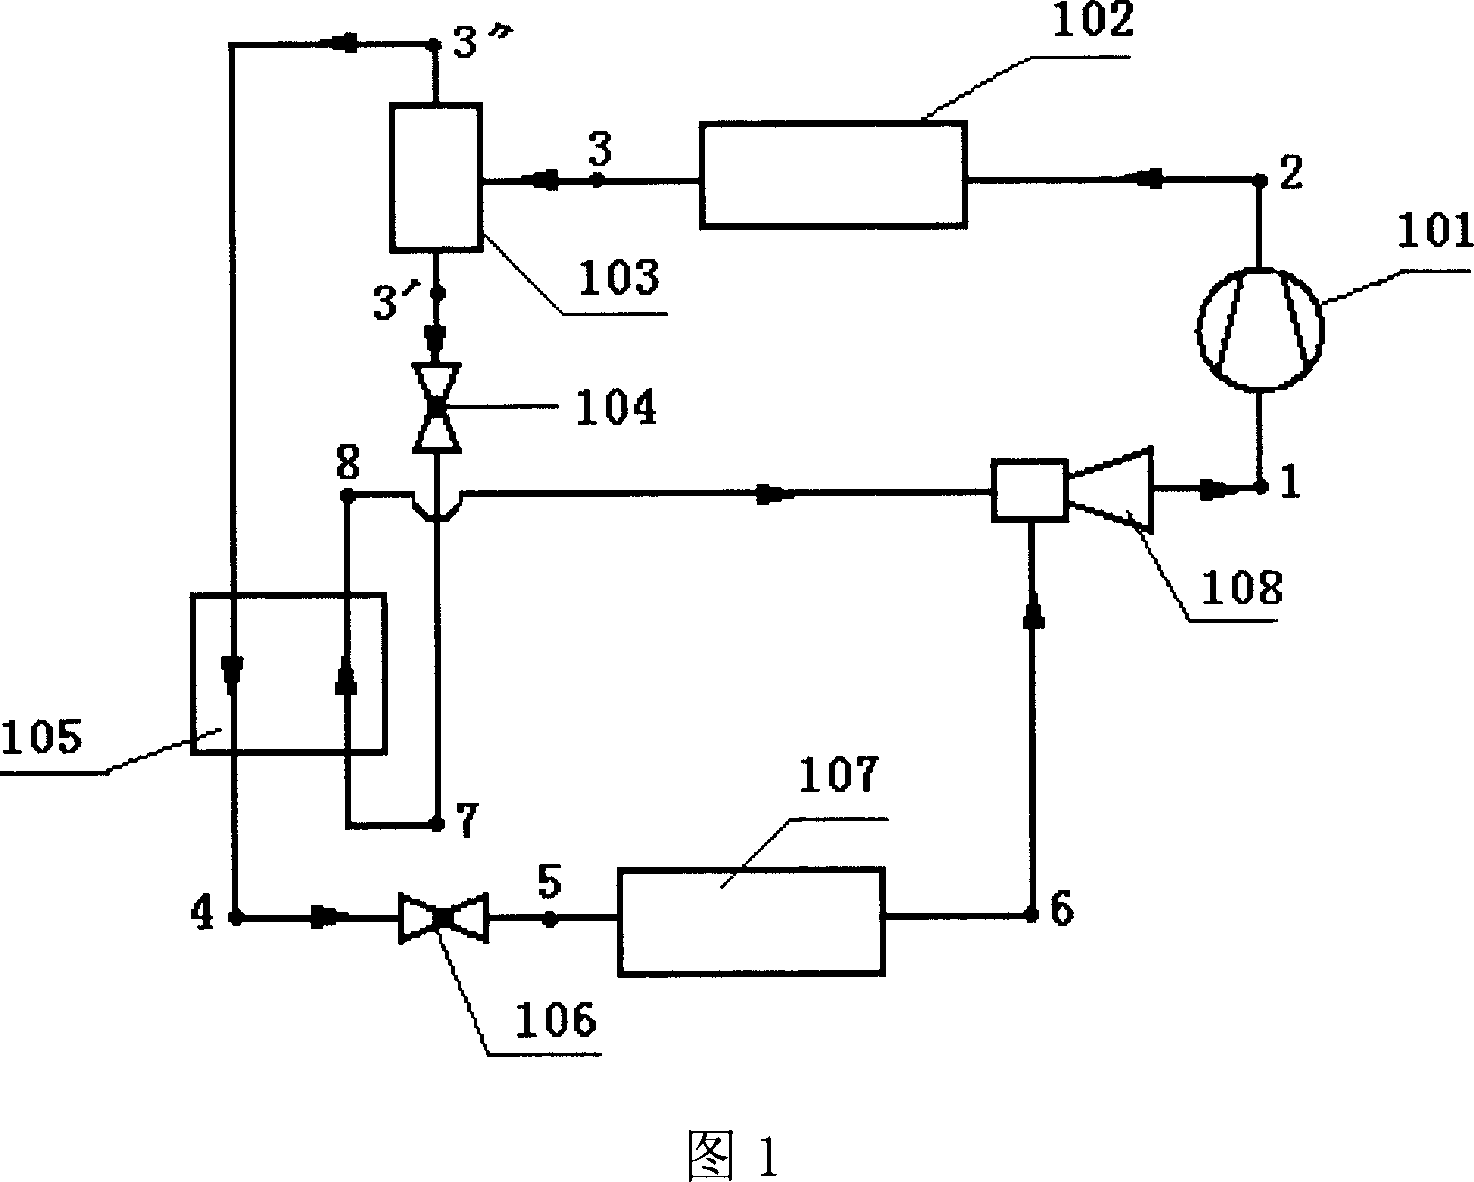 Self-overlapping refrigerating cycle system with injector